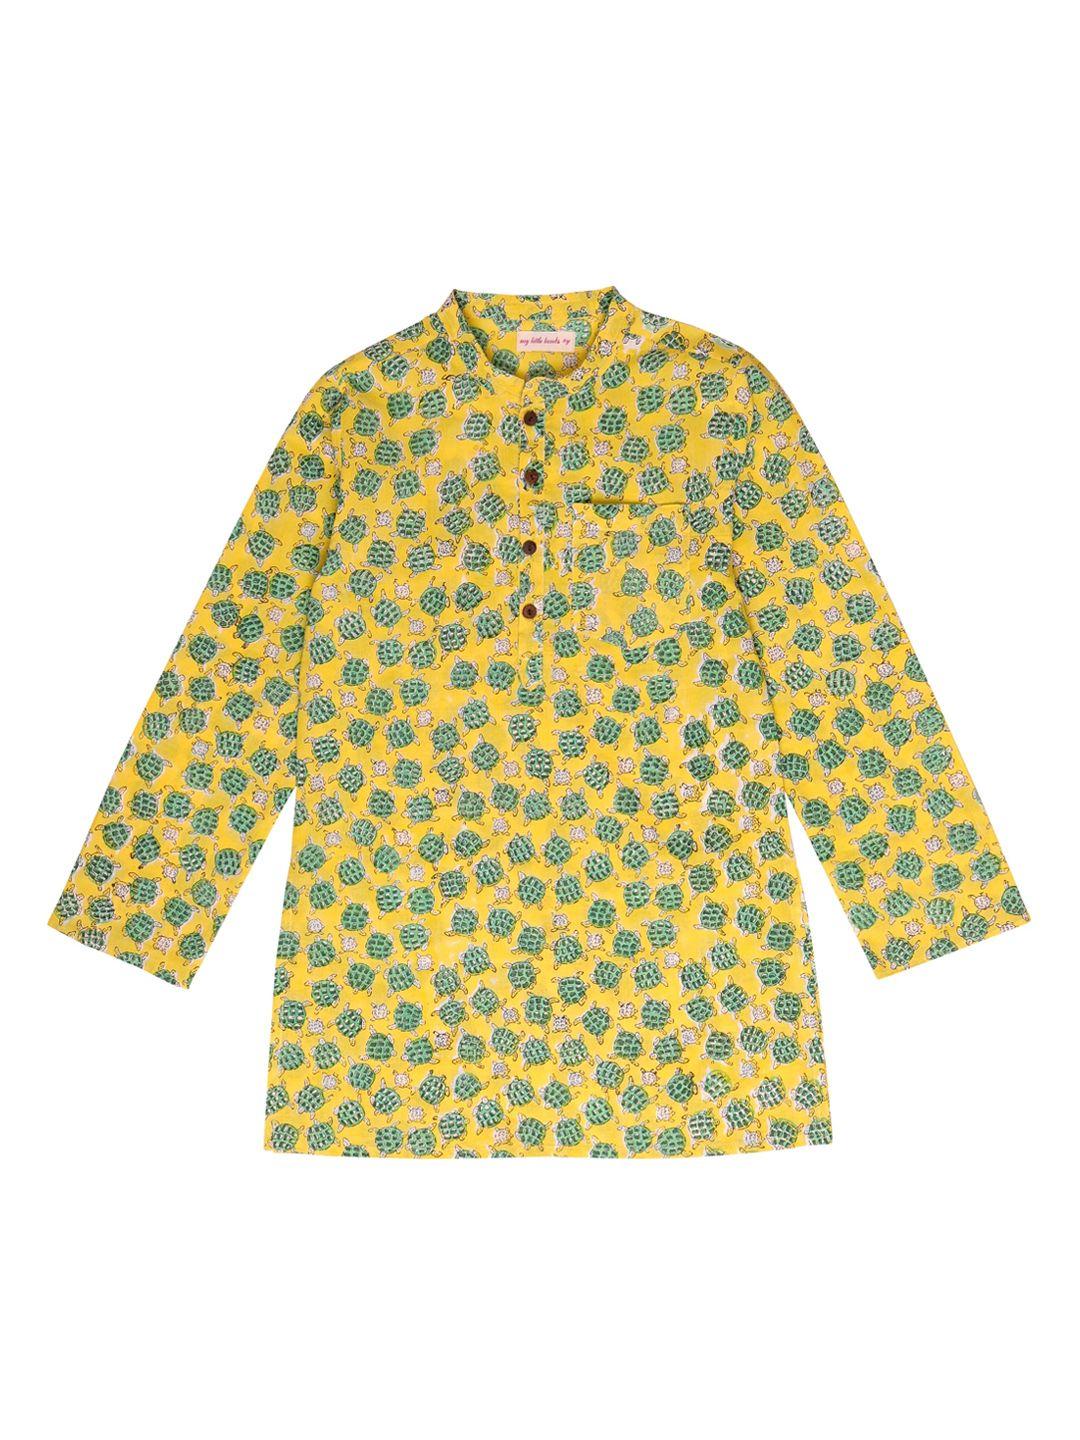 my little lambs boys yellow & green quirky printed quirky kurta